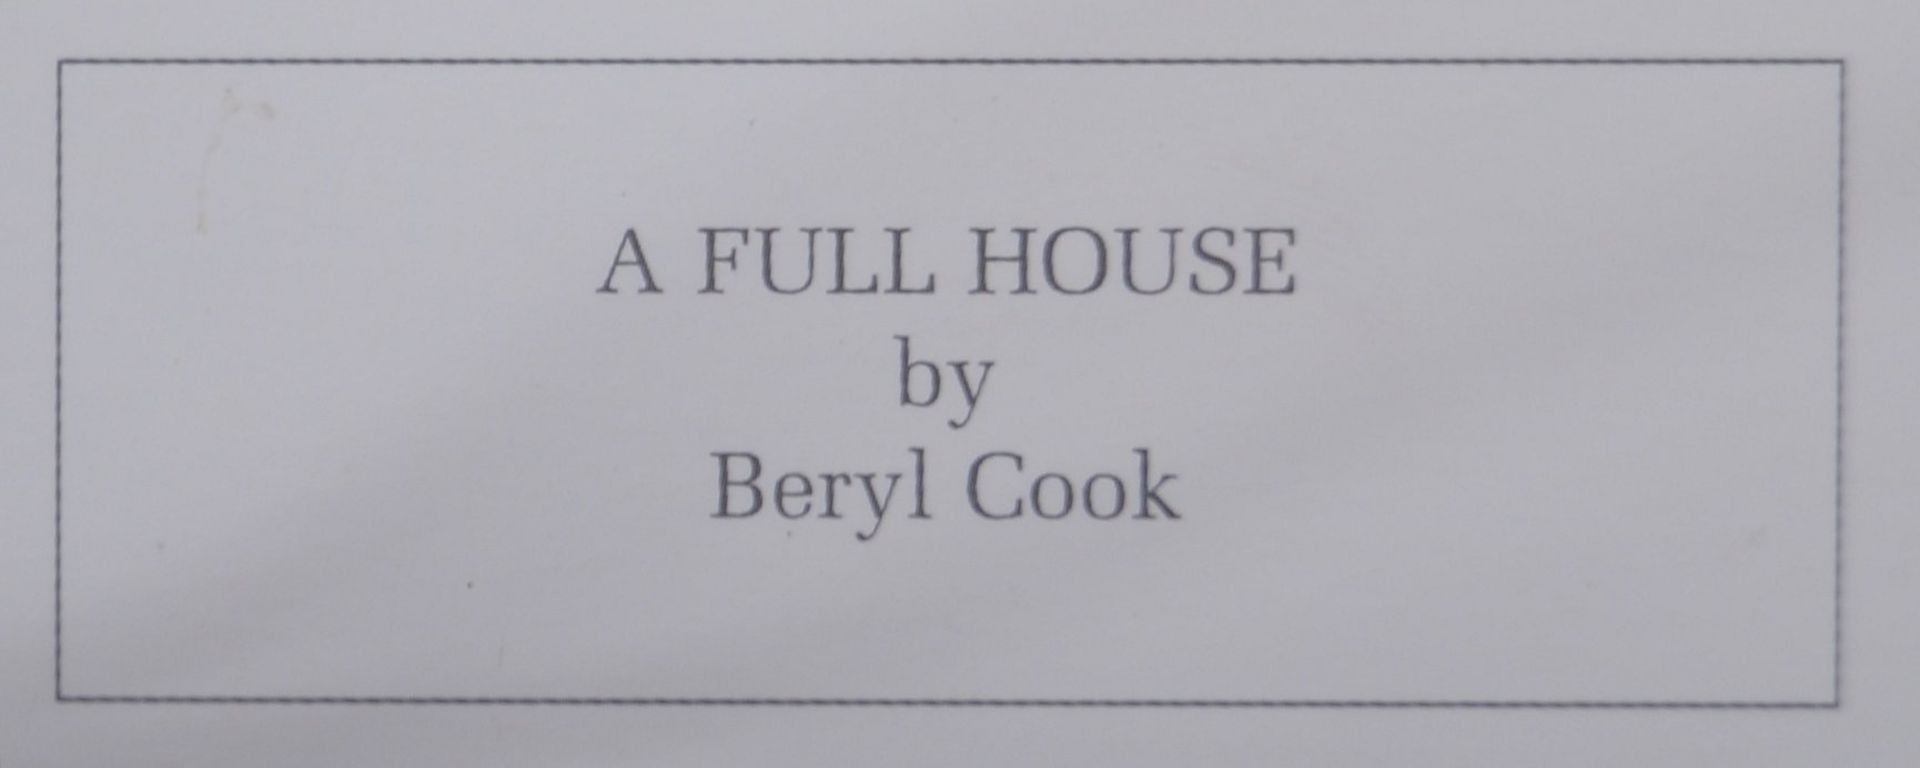 BERYL COOK SIGNED PRINT A FULL HOUSE FROM THE ALEXANDER GALLERY - Bild 5 aus 6